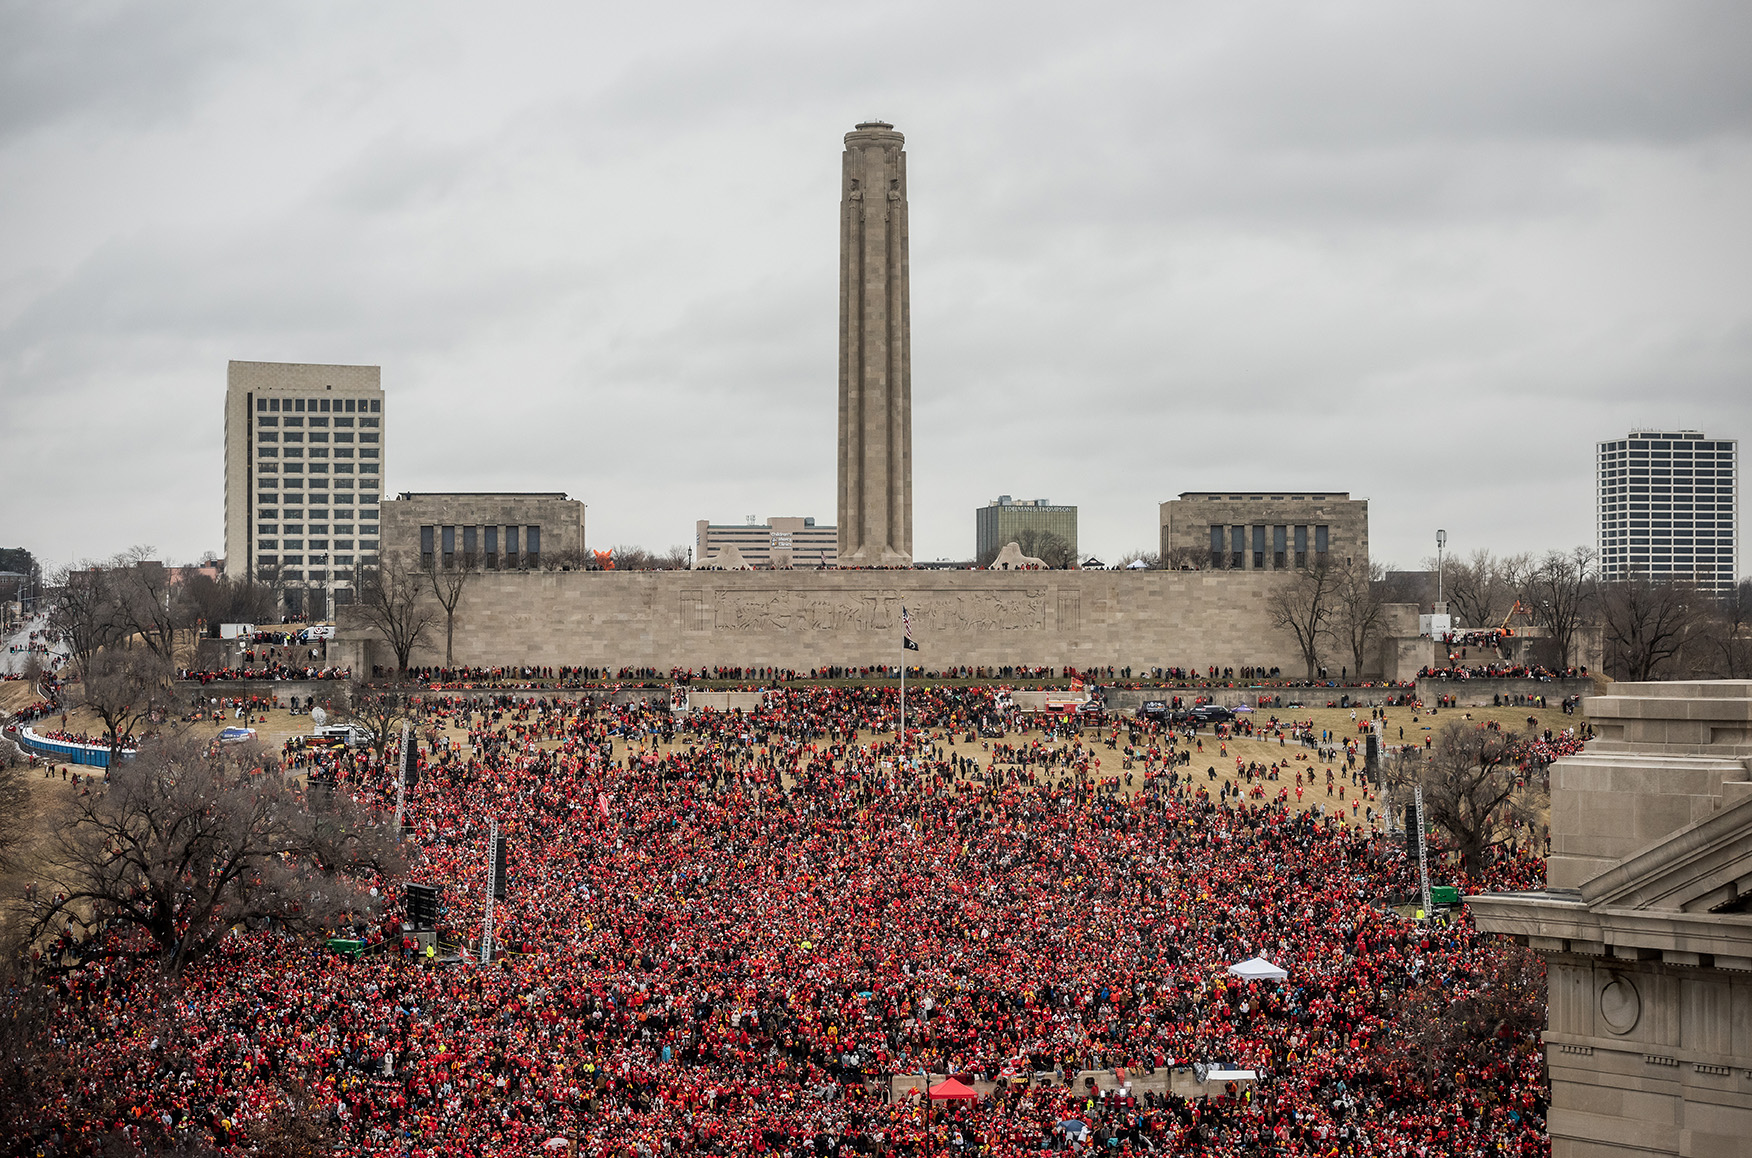 Modern photograph of the North Lawn of the Museum and Memorial grounds with the Liberty Memorial Tower in the background. The entire area is filled with a huge crowd dressed in red.